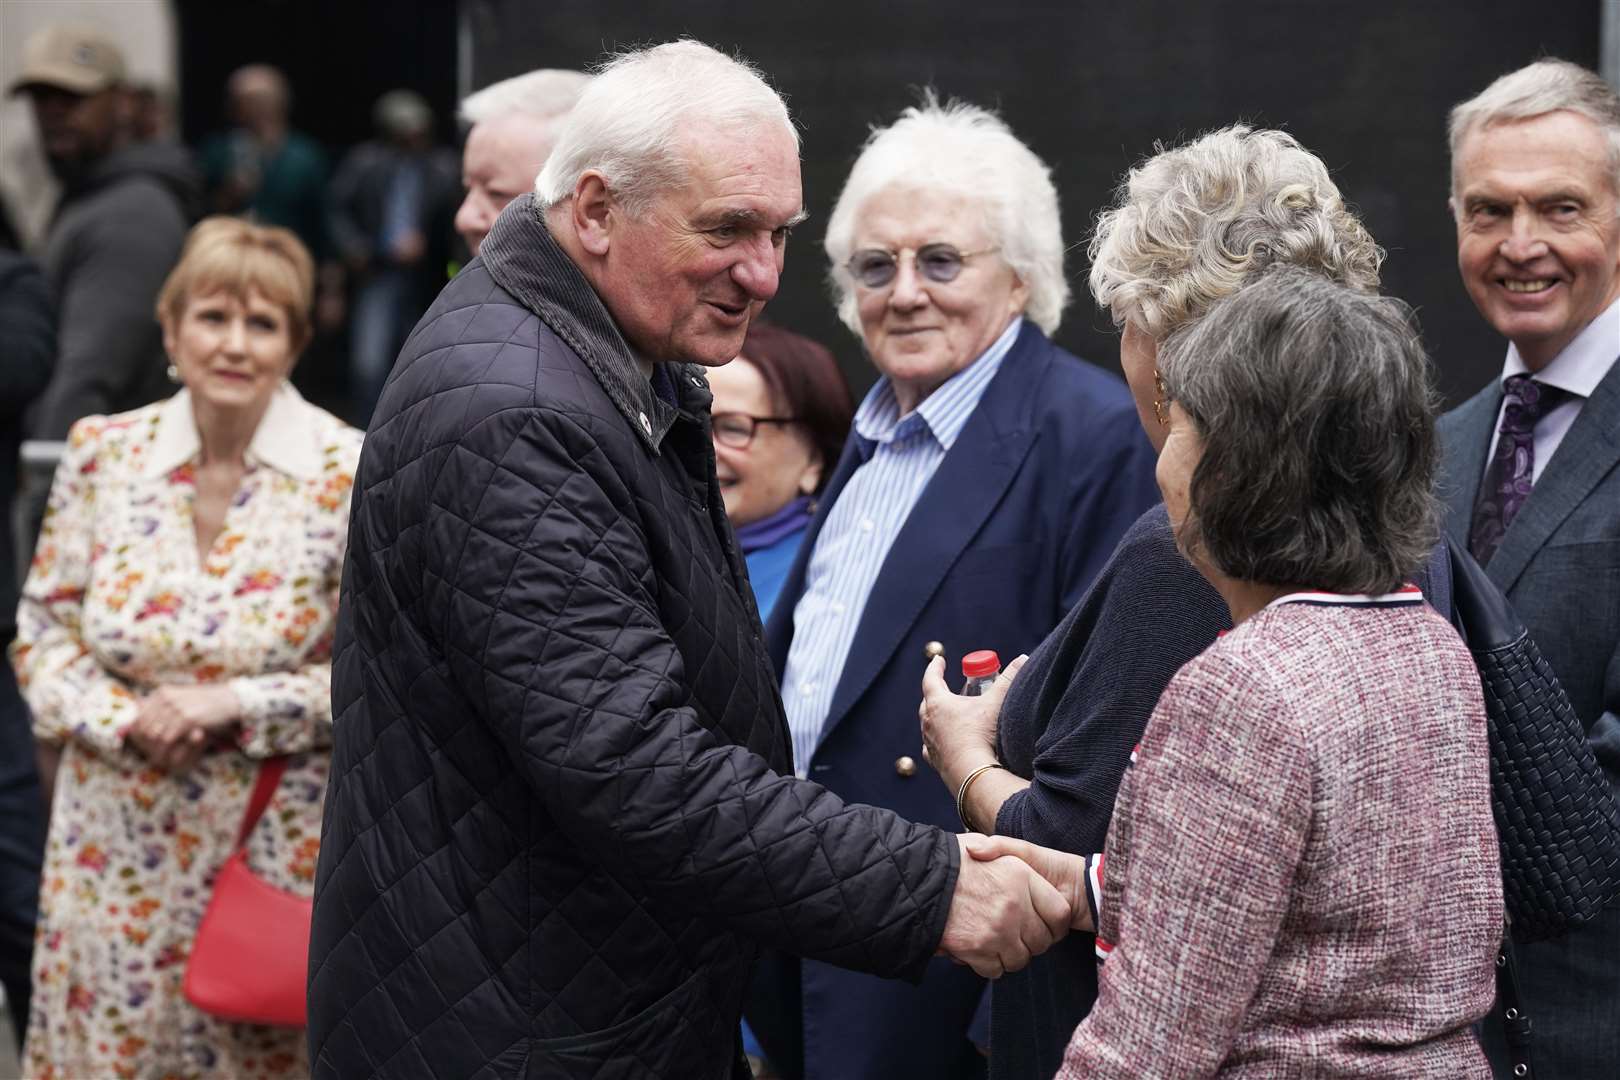 Former taoiseach Bertie Ahern at the ceremony (Brian Lawless/PA)